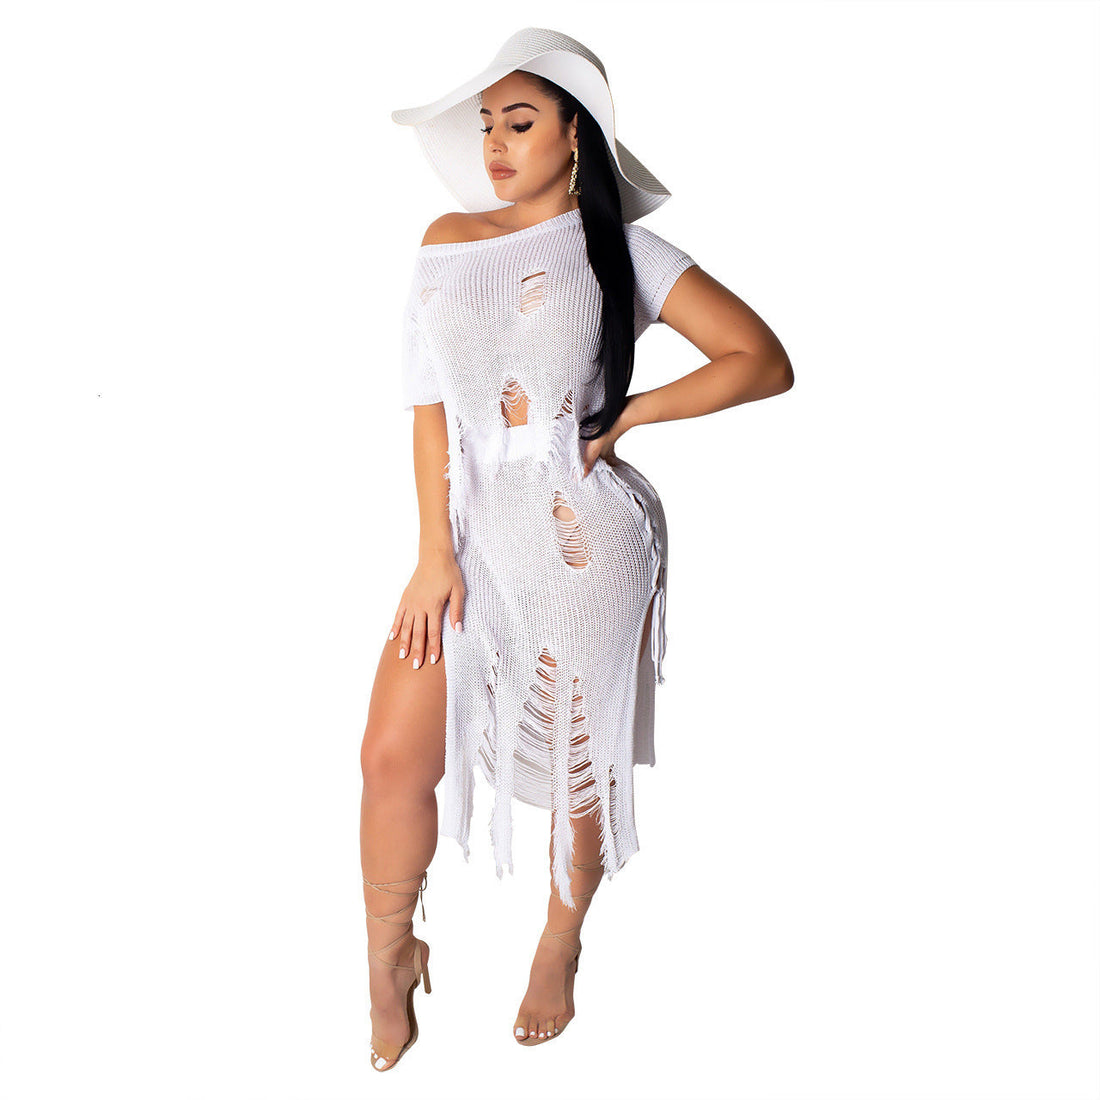 Women's Summer Knitted Sheath Two-Piece Dress With Tassels